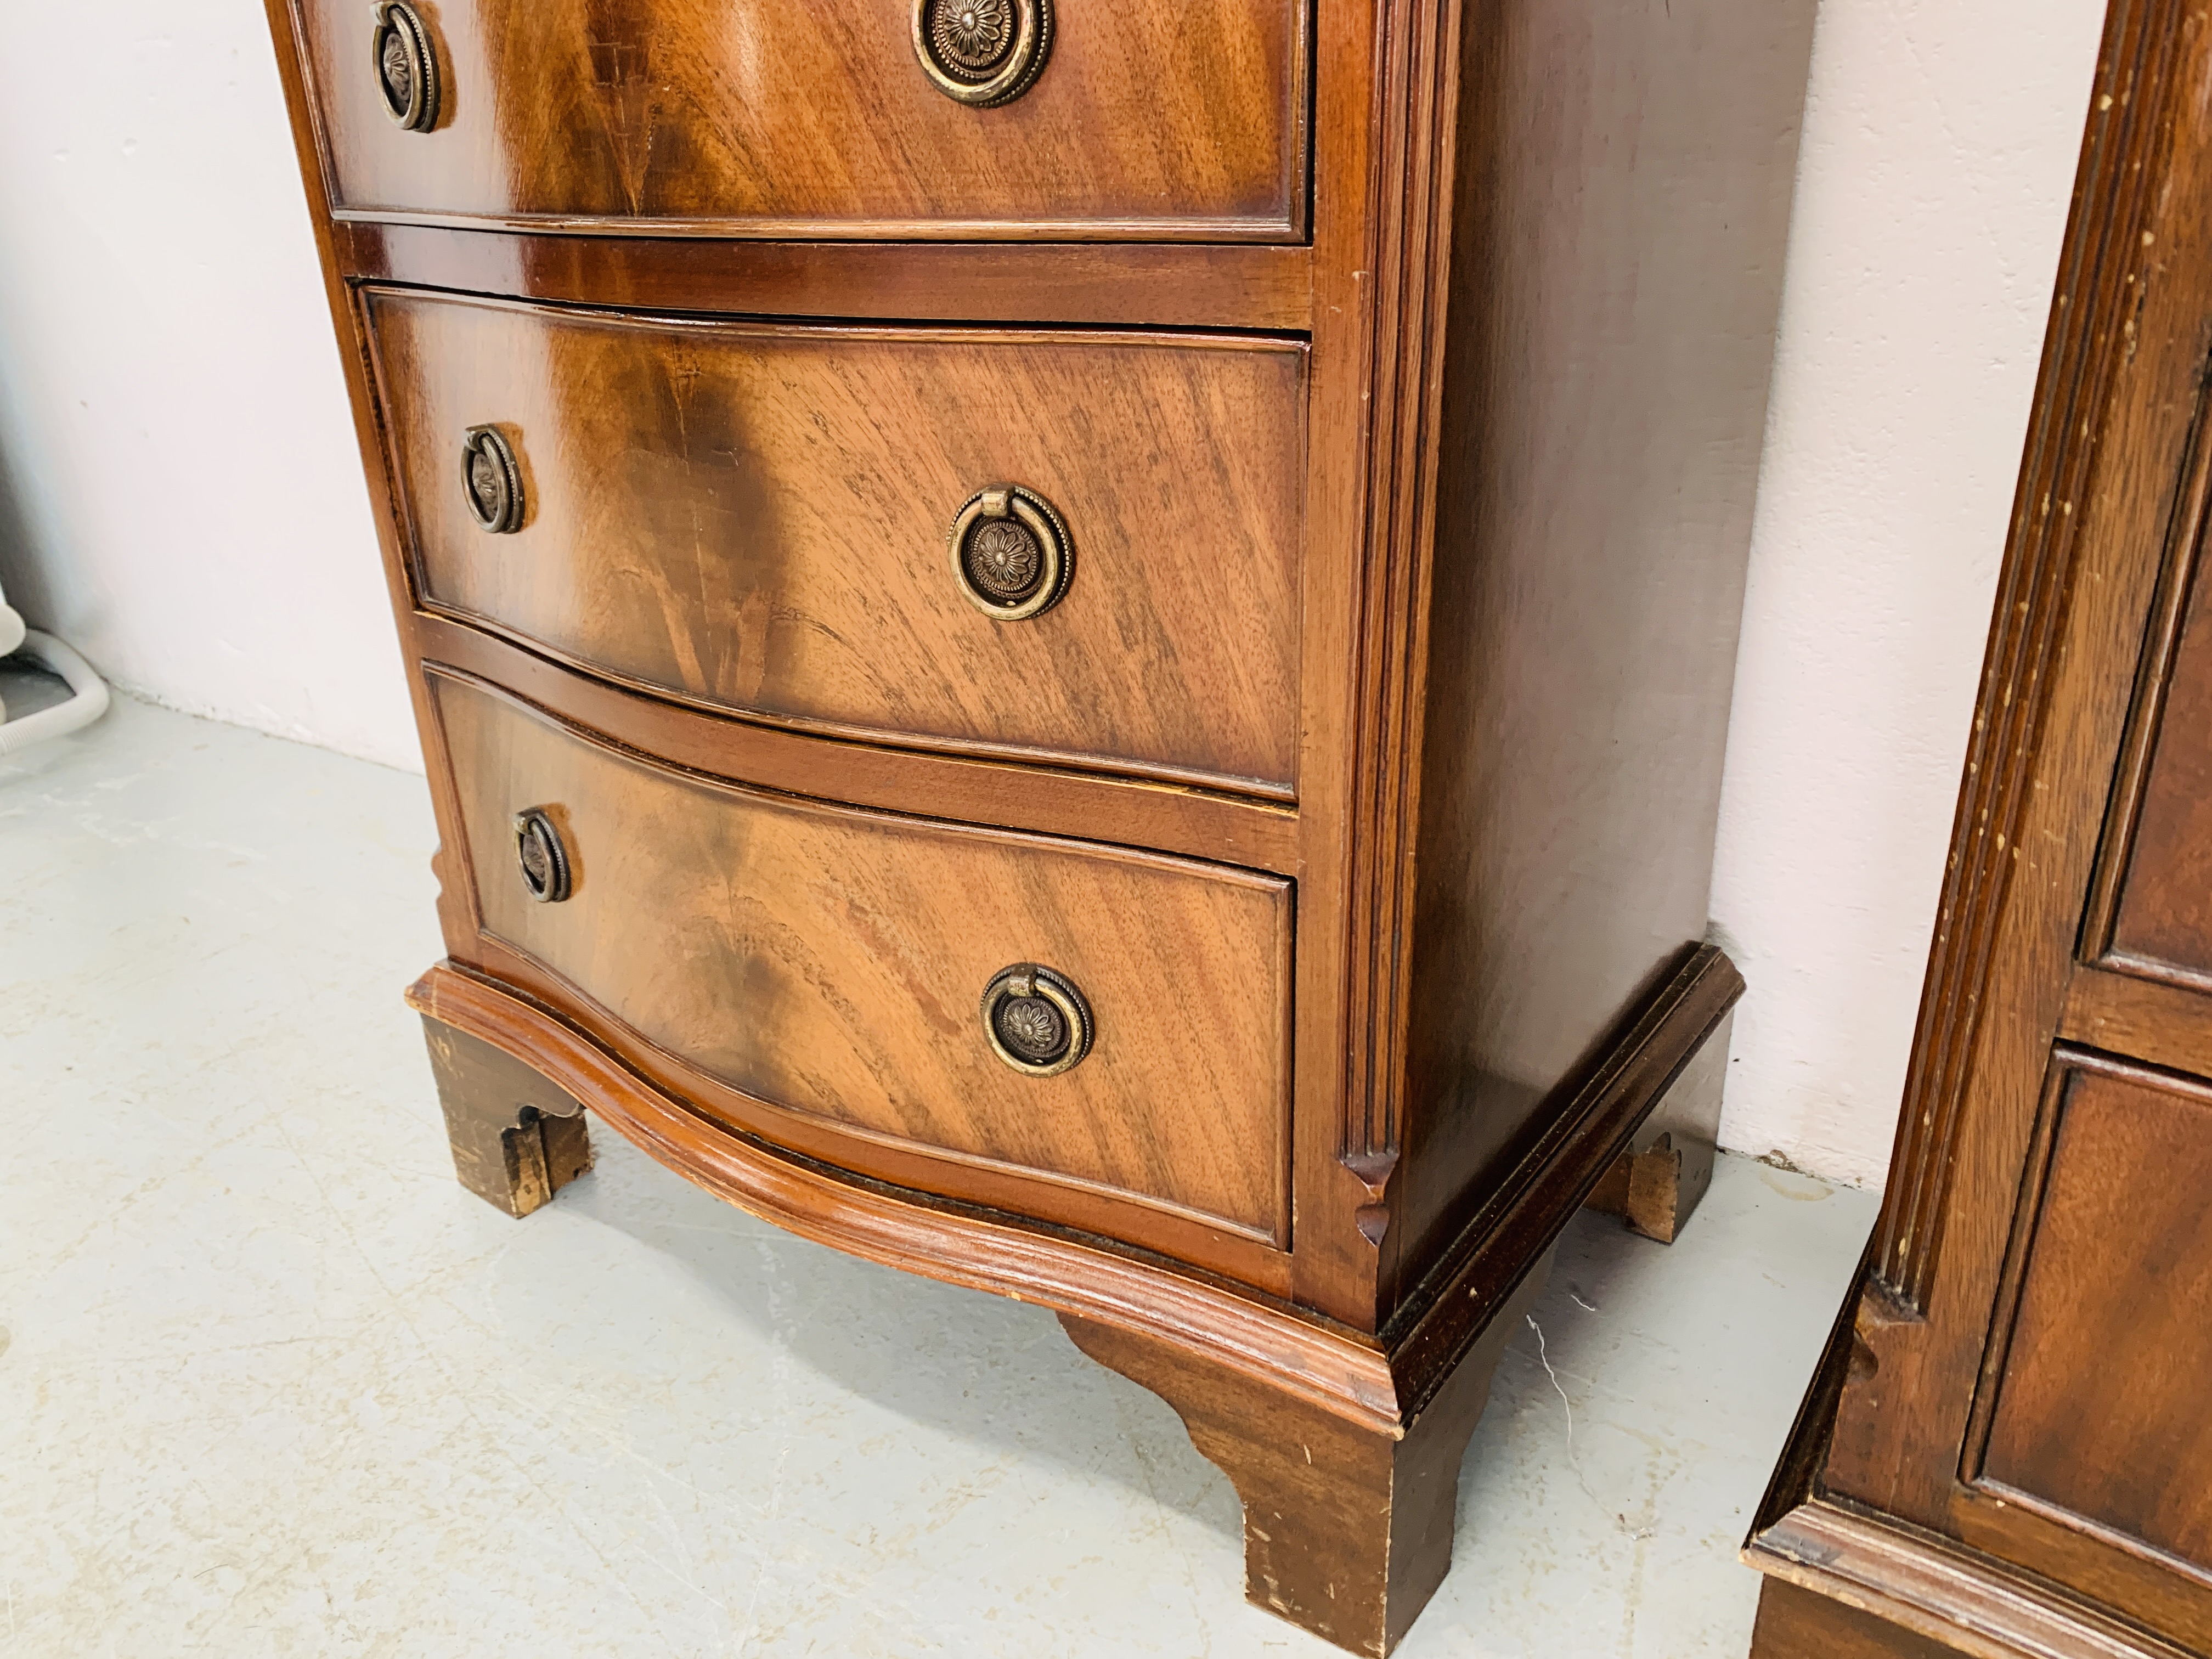 PAIR OF FLAME MAHOGANY FOUR DRAWER CHESTS - W 49CM. D 36CM. H 70CM. - Image 8 of 10